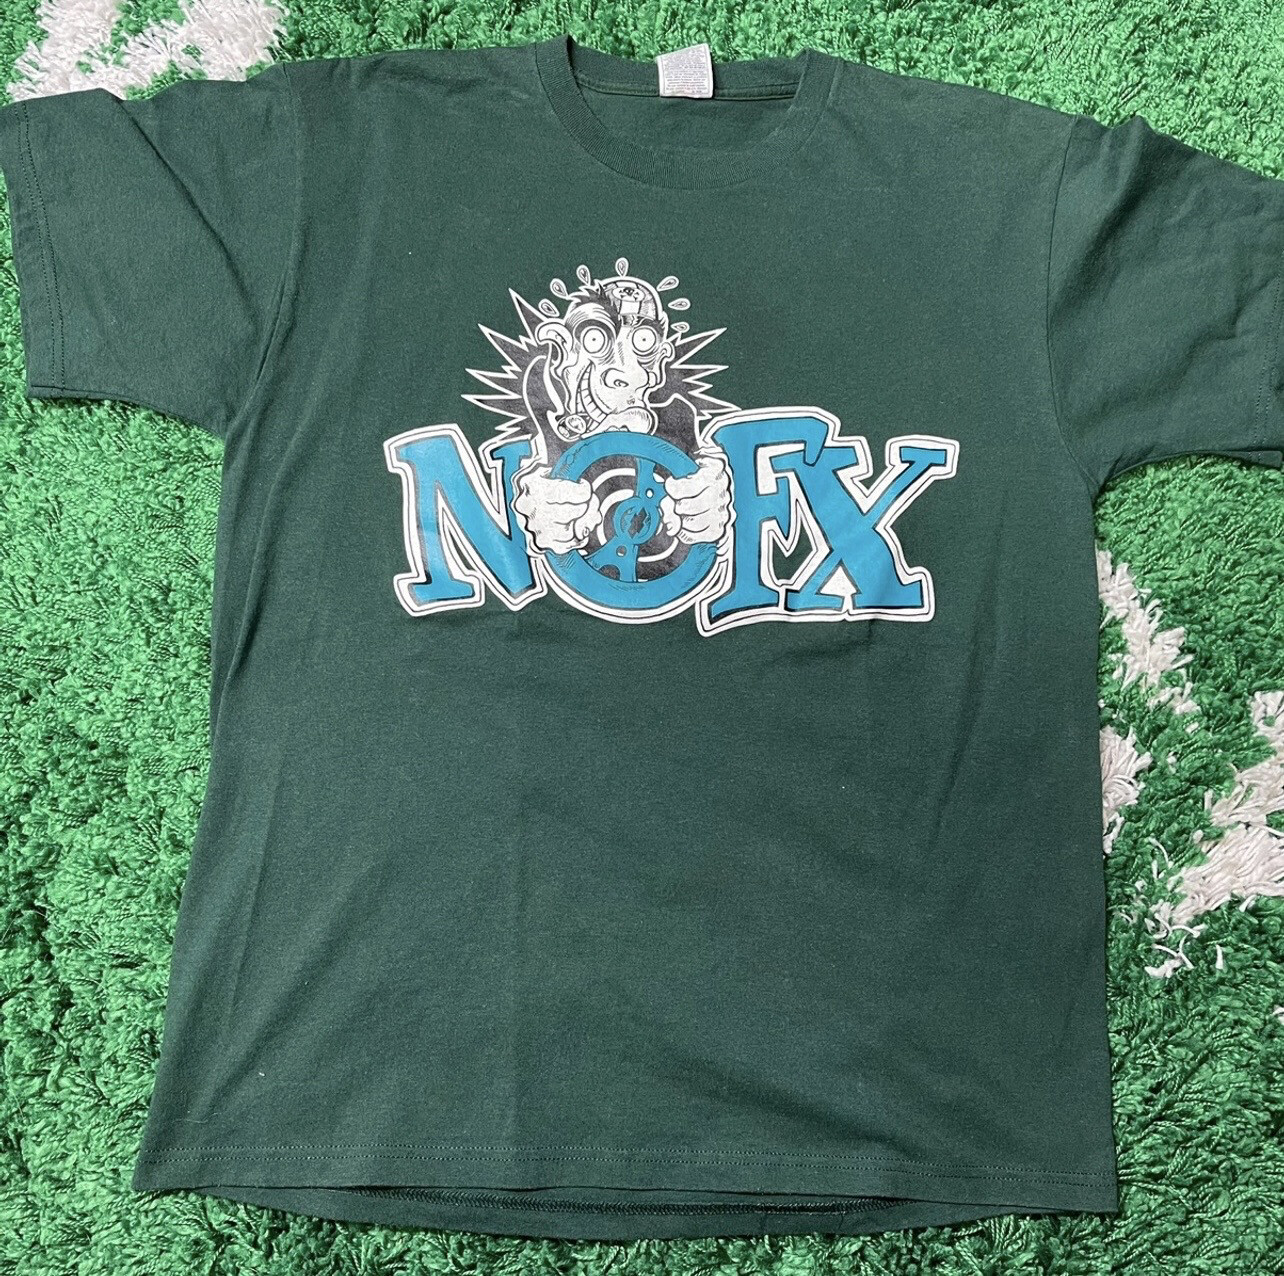 NOFX 90s Tee Size Large